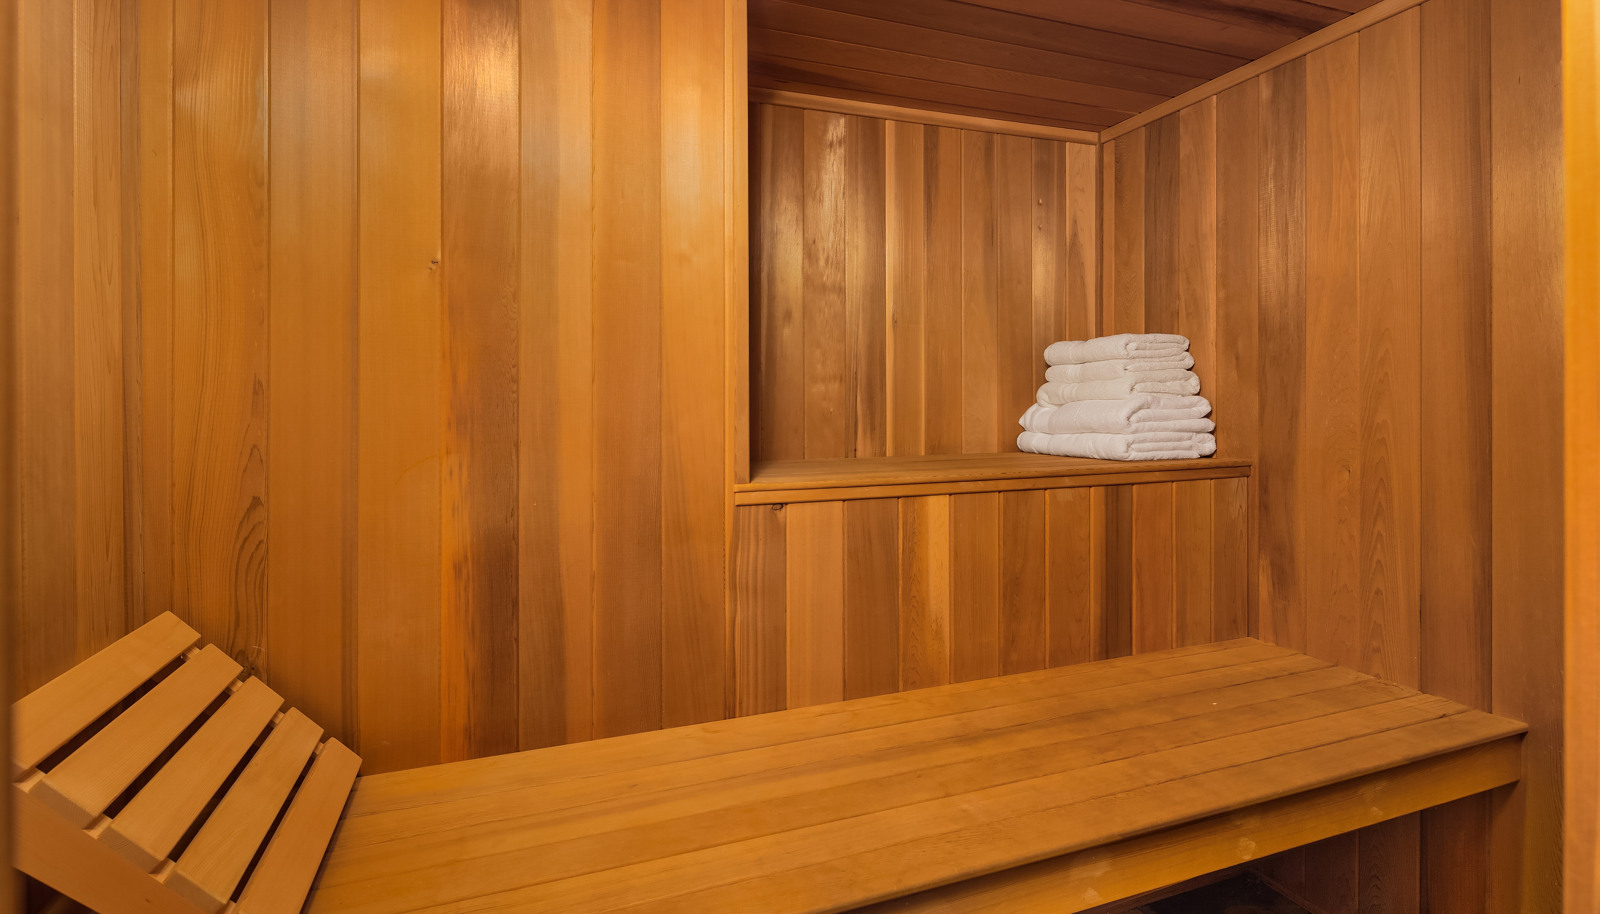 Dry sauna pictured here, wet sauna pictured in the full photo gallery in the Virtual Tour link.